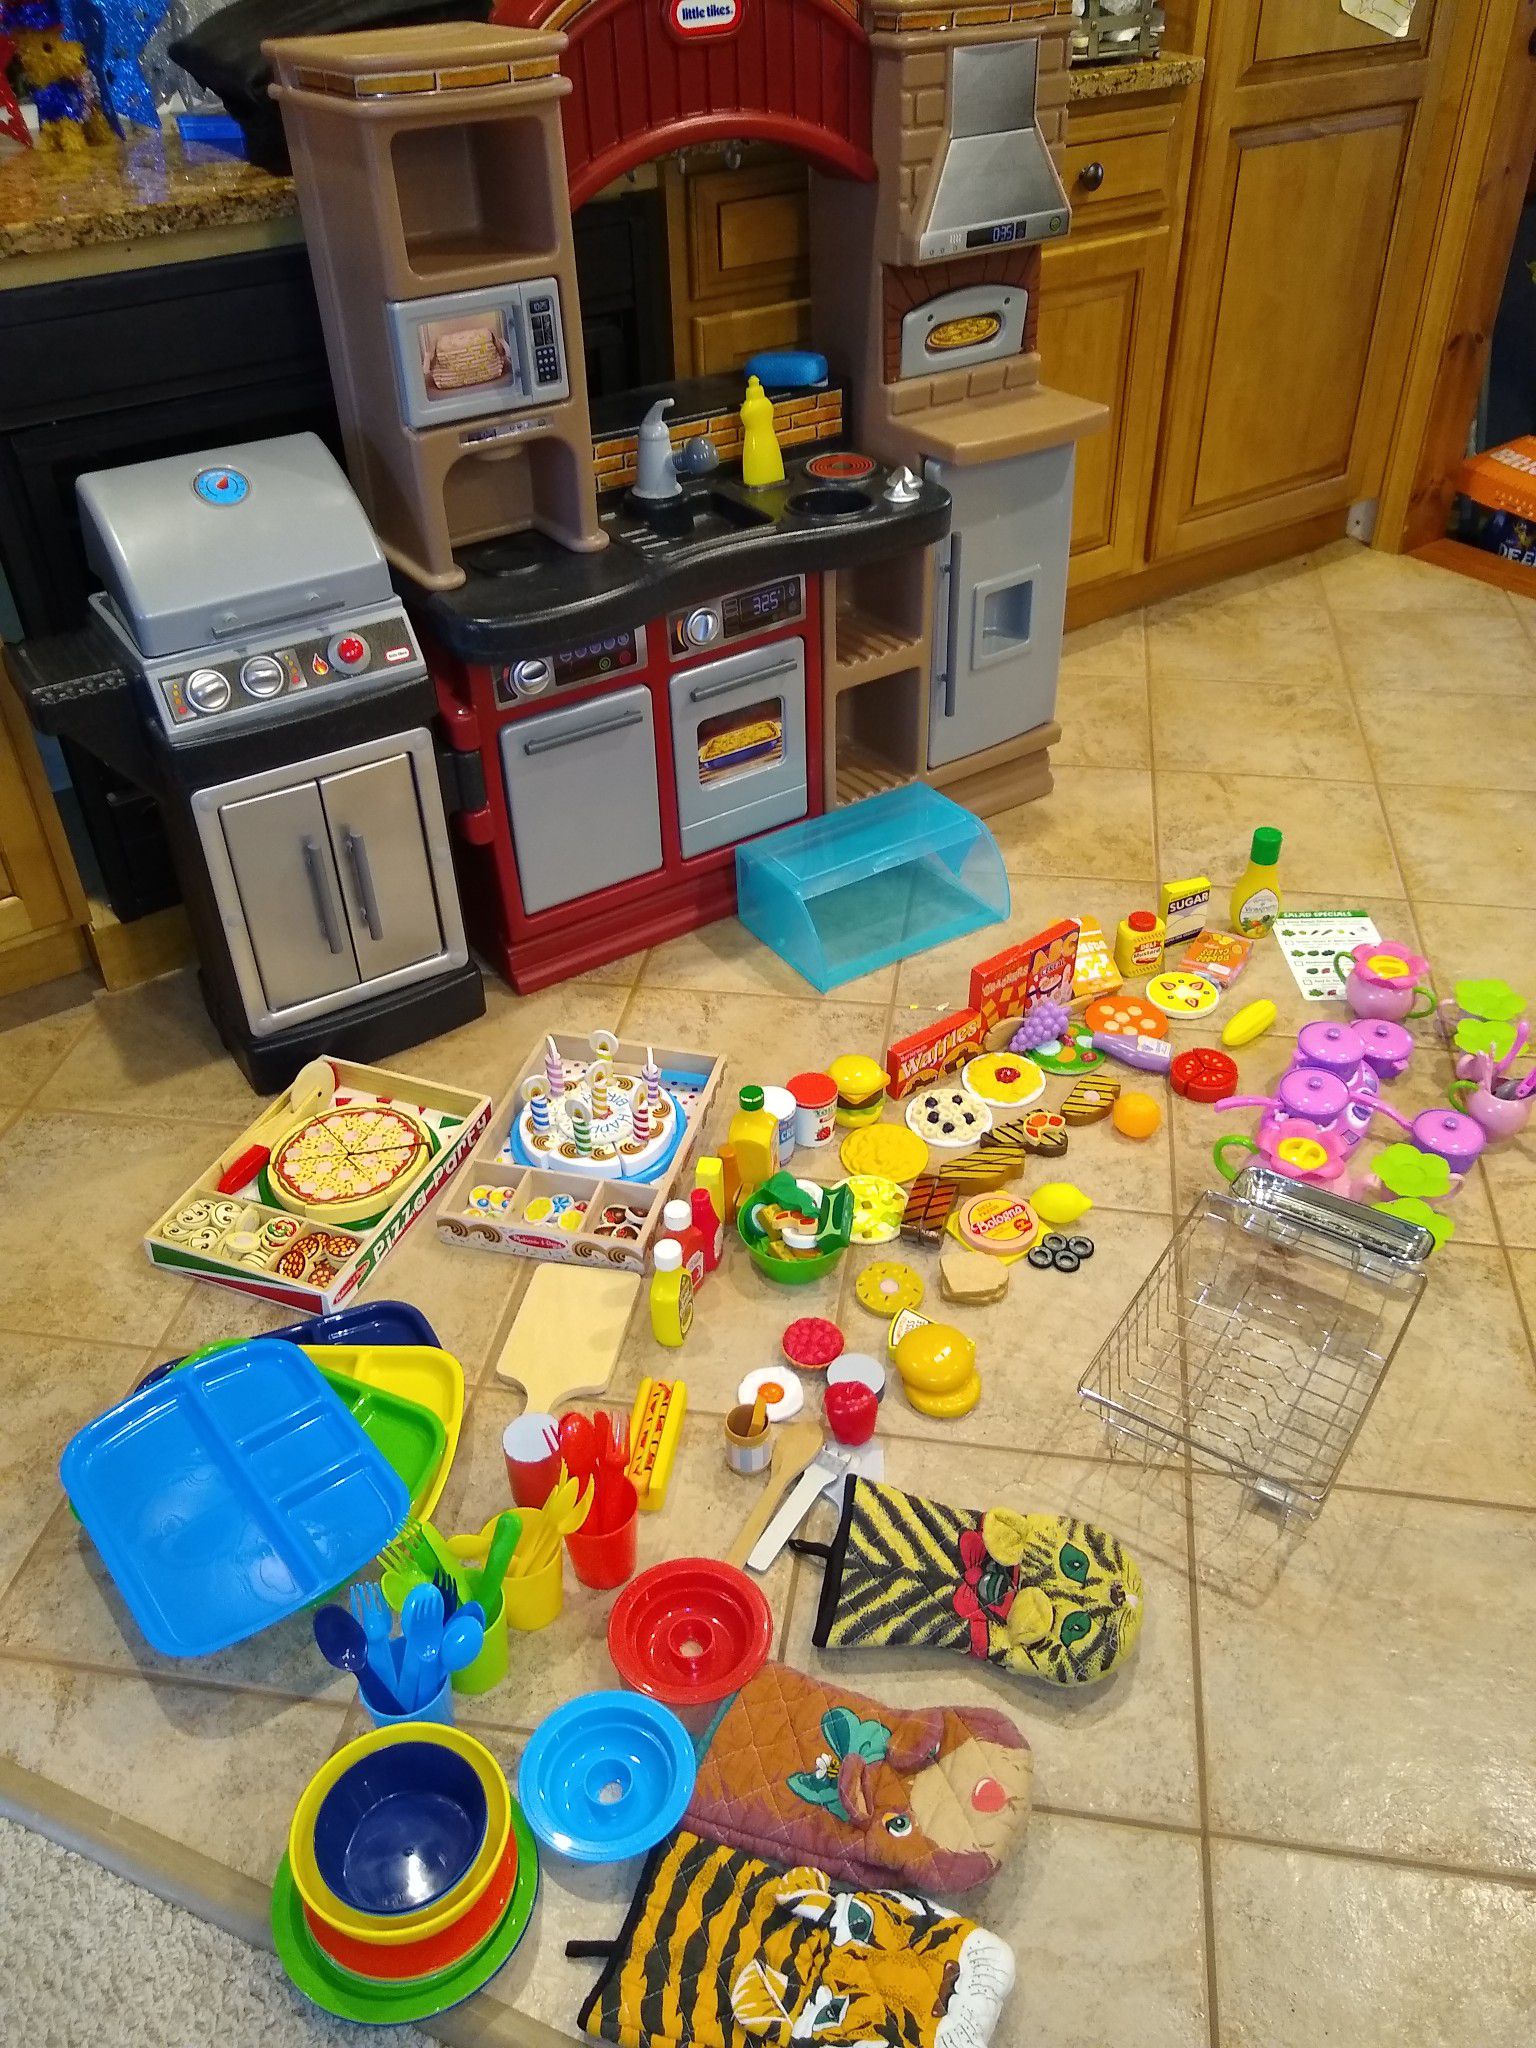 Awesome kitchen play set with accessories